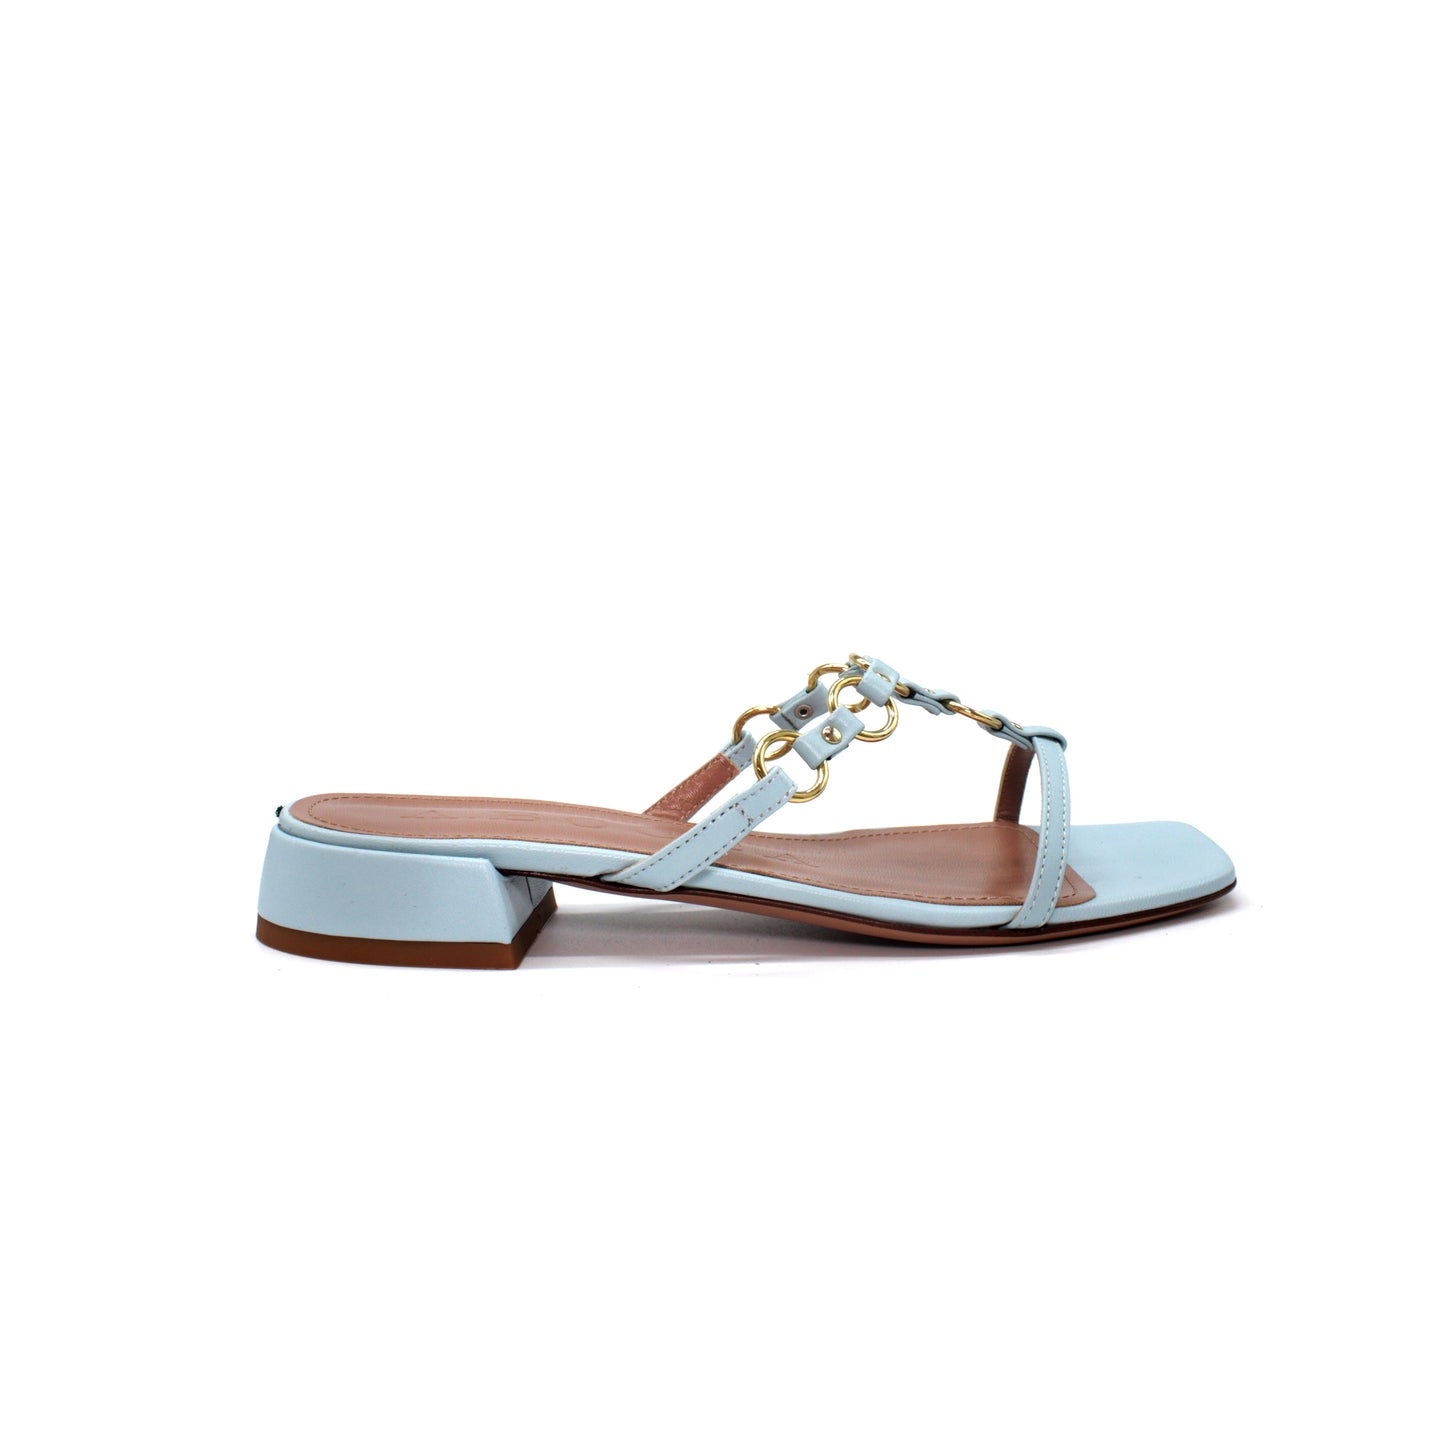 Sky-colored nappa leather ring sandal